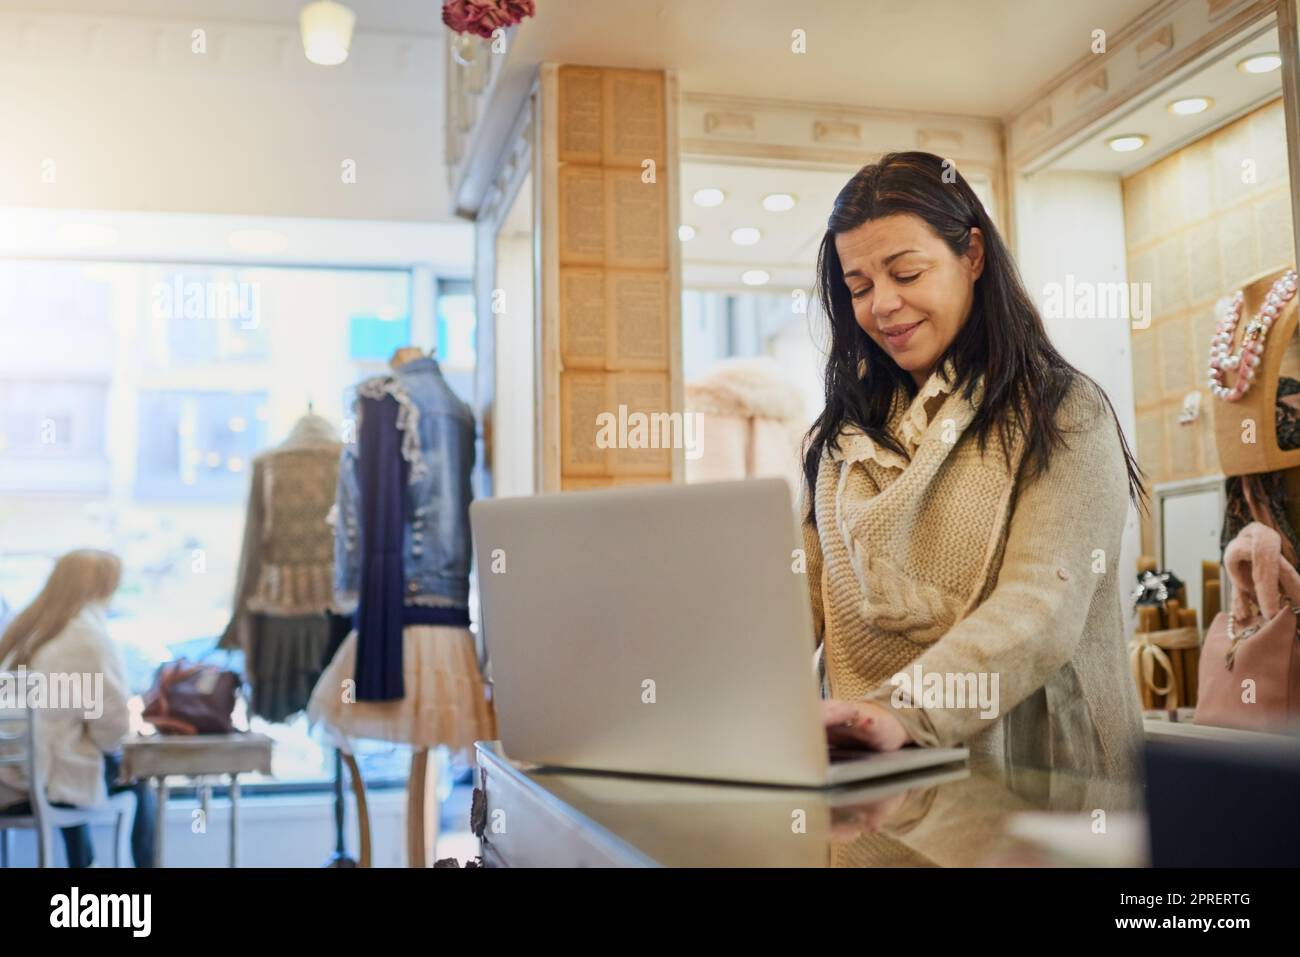 Using online resources to manage her business. an attractive mature female entrepreneur working on a laptop in her self-owned boutique. Stock Photo